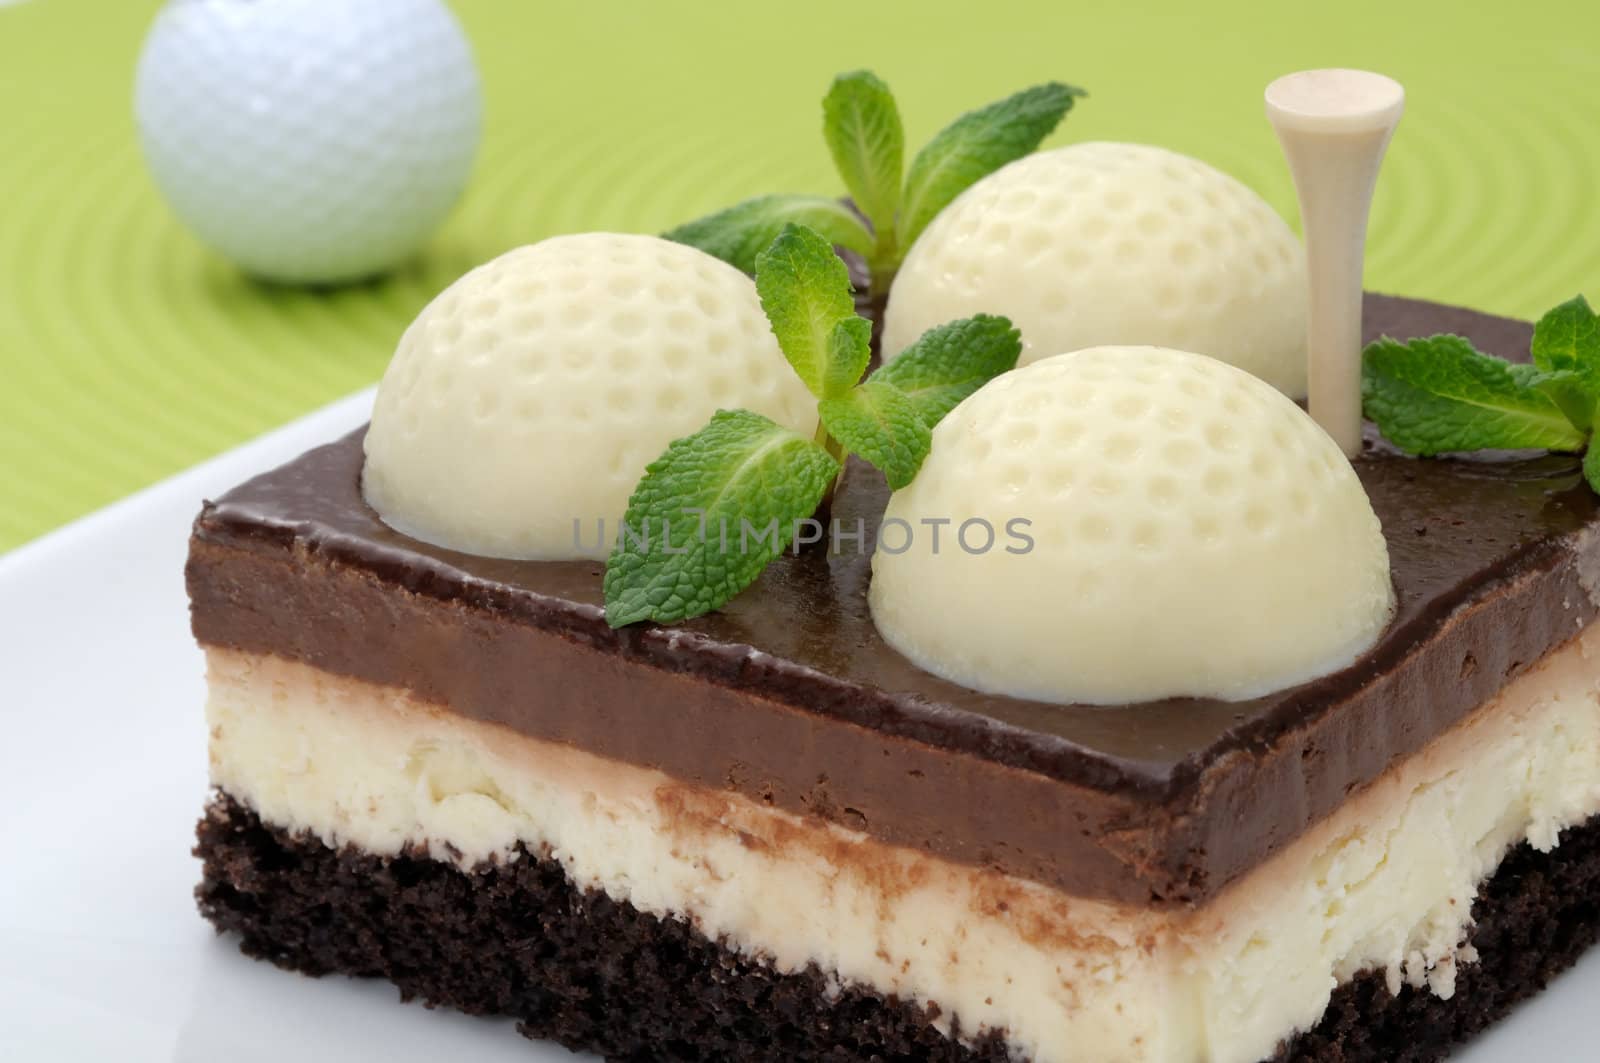 Fanciful chocolate golf cake with mint leaves on a green mat